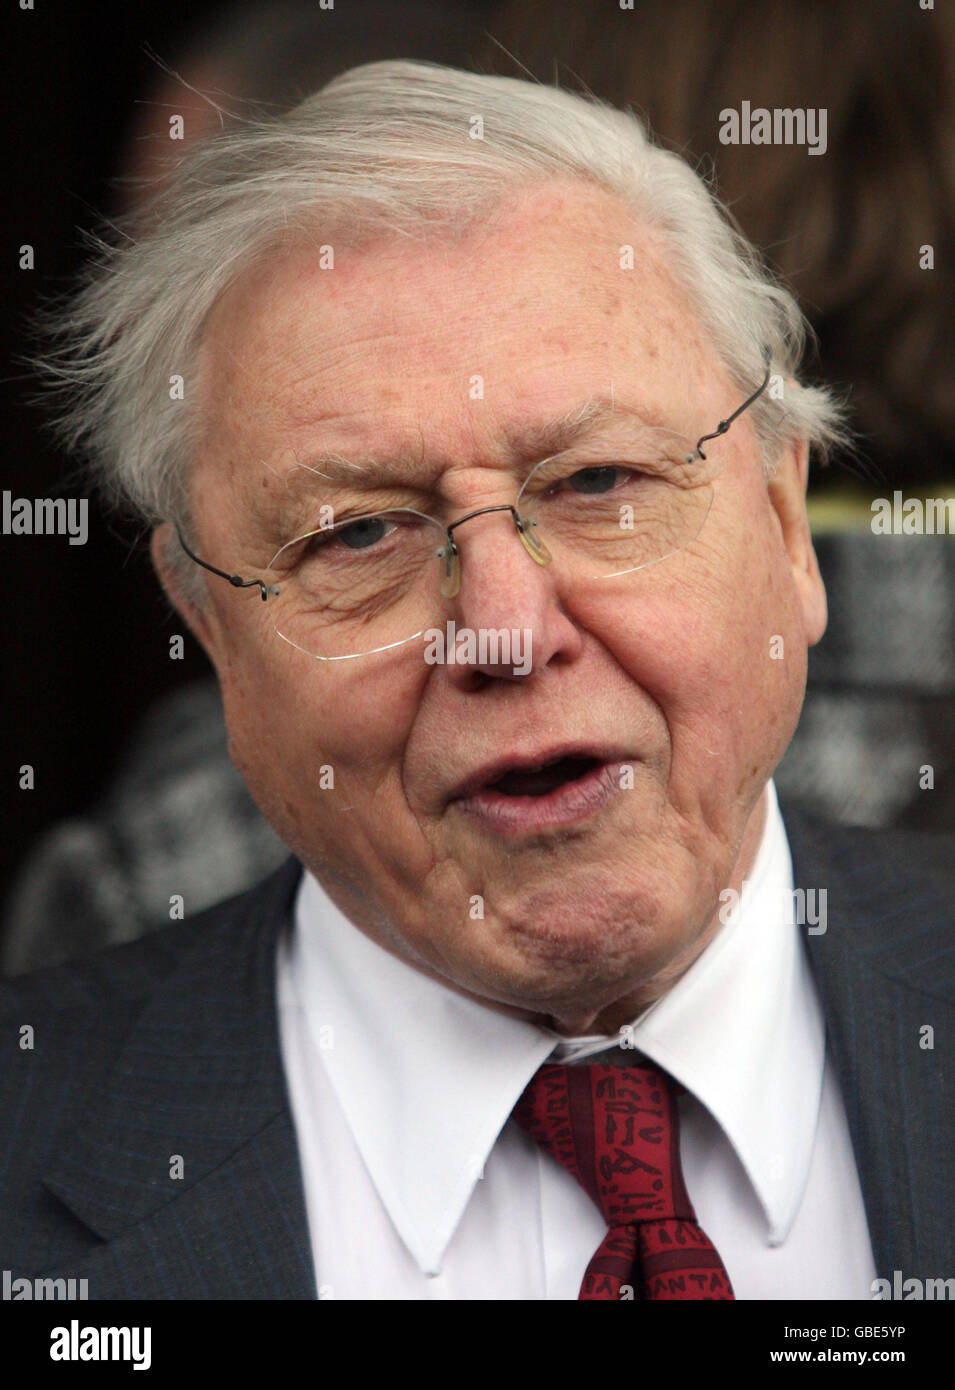 Sir David Attenborough attends a memorial service for Sir Bill Cotton, the BBC light entertainment executive, at St Martins-in-the-Fields, Trafalgar Square, London. Stock Photo